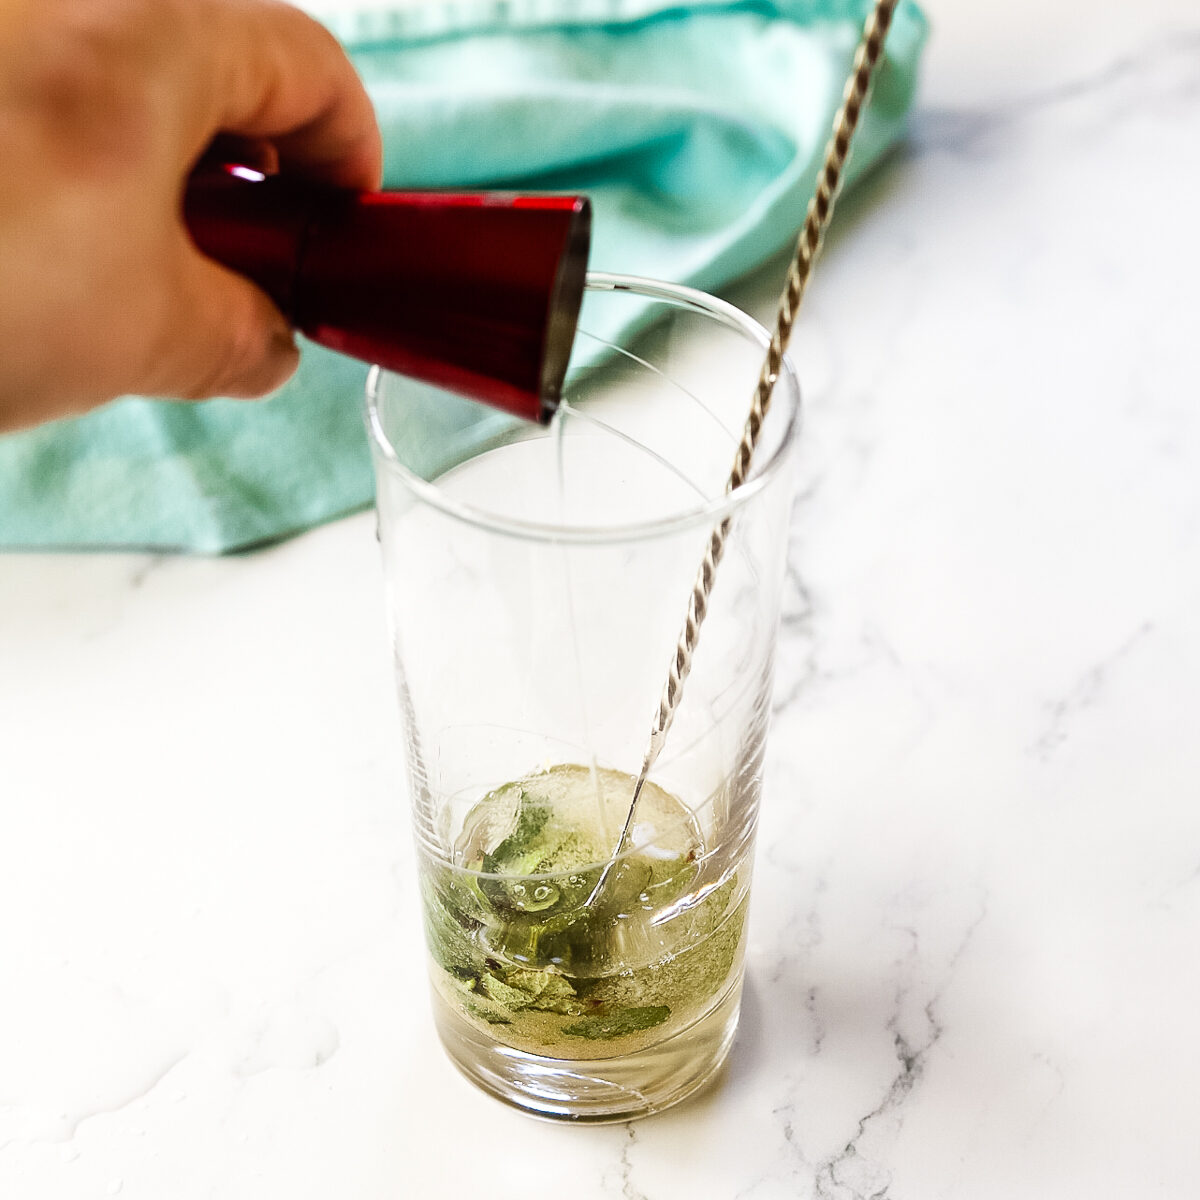 A red shot measure is pouring gin into the muddled mint and sugar in the clear glass.